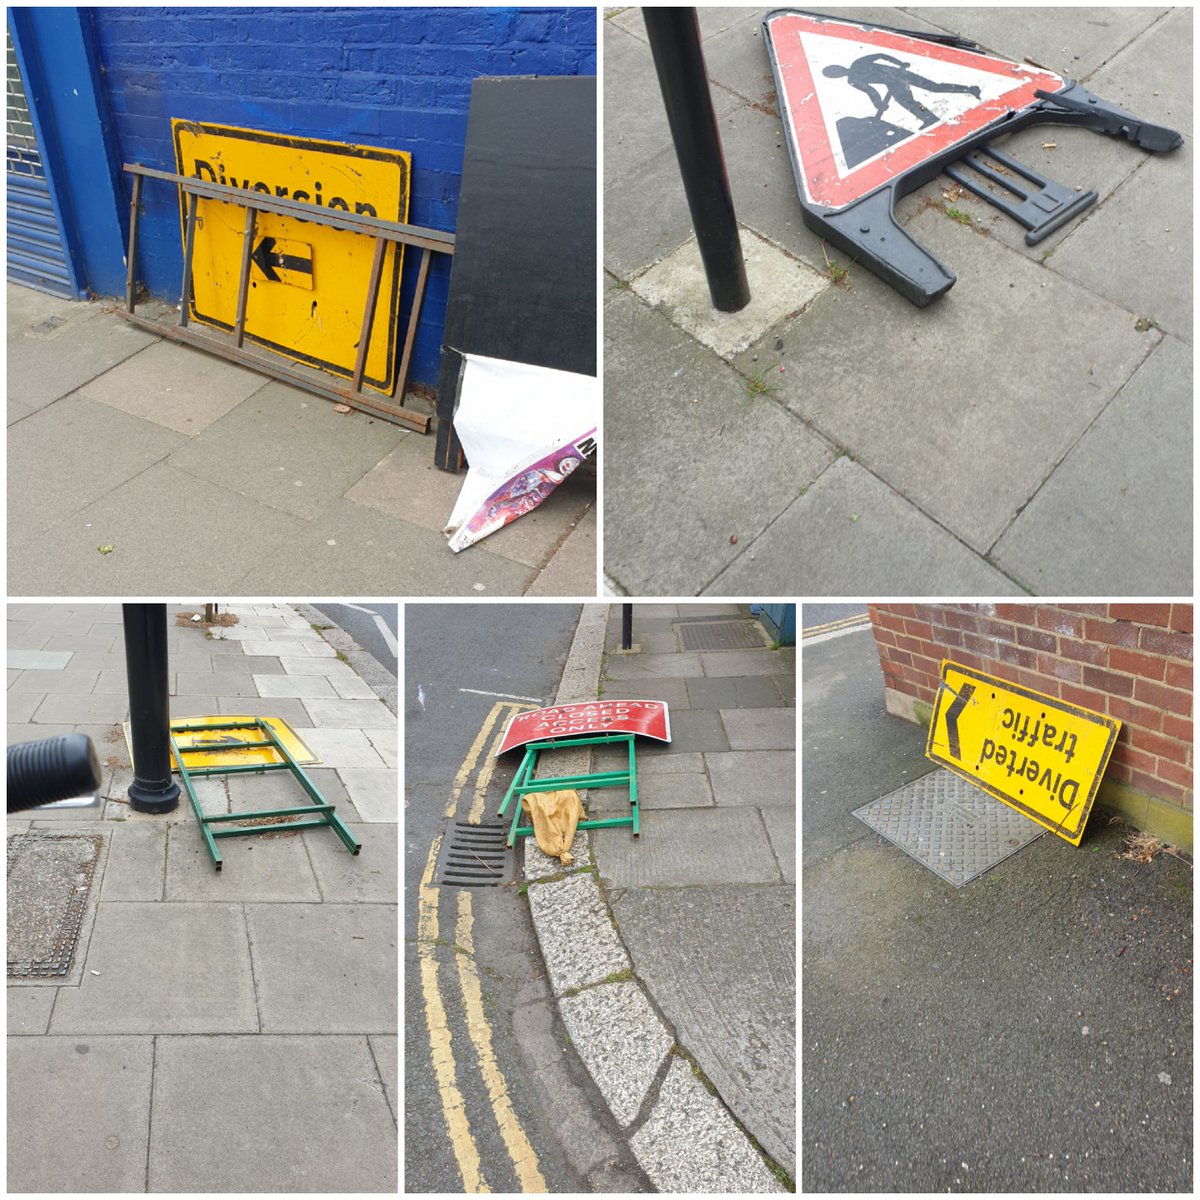 @EalingCustSer @EalingCouncil
Any chance some procedure can be followed so temporary roadwork signage isn't continually forgotten & left obstructing pavements? Fed up of reporting it. These were all spotted in 1 day.

@BetterEaling  
#active travel
#no to pavement clutter